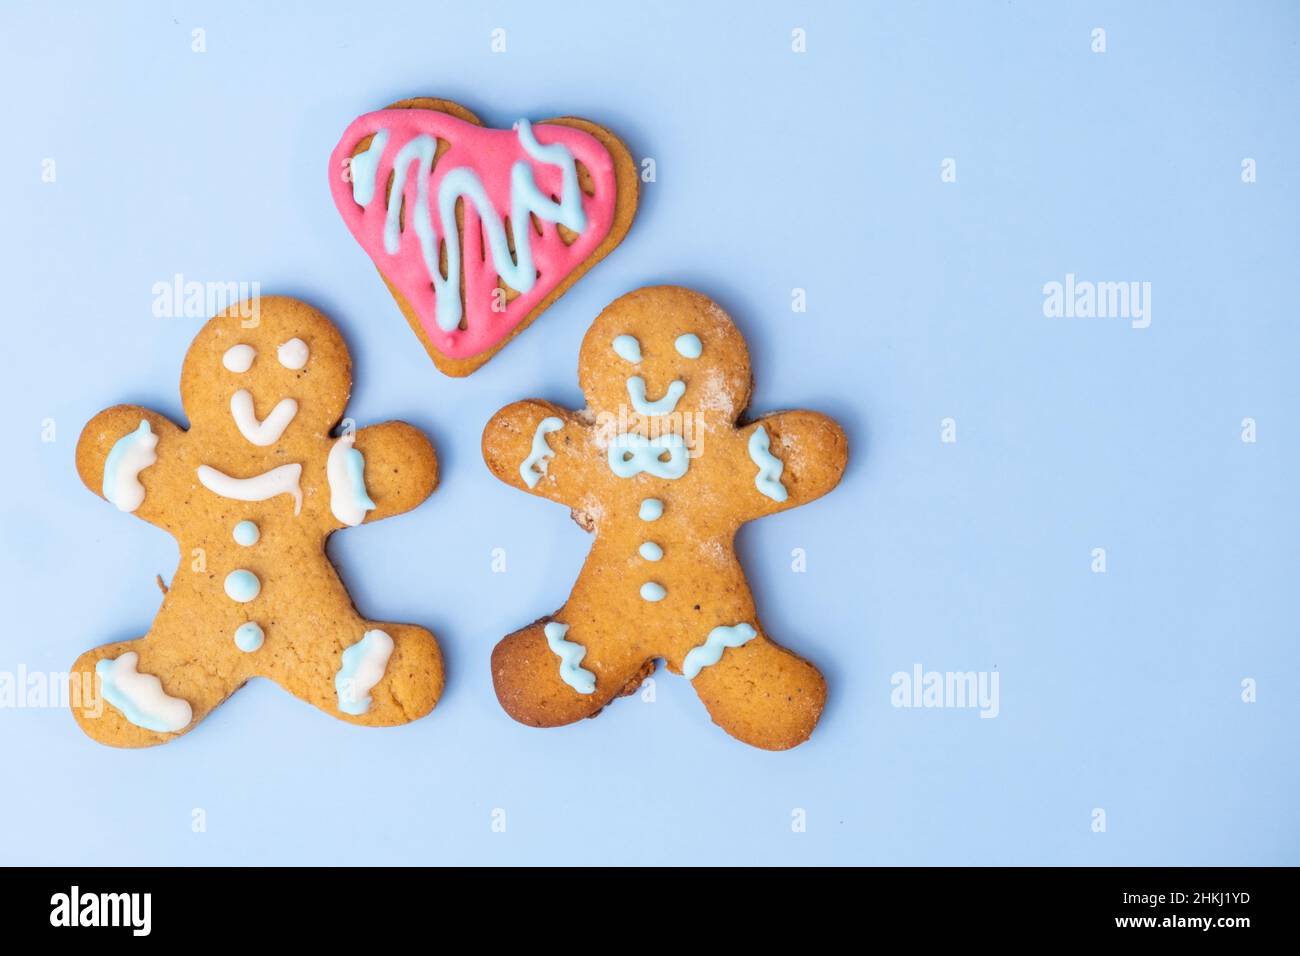 Black and white homosexual couple, two gingerbread girls and heart on the blue background with copy space for St Valentines Day.  Stock Photo